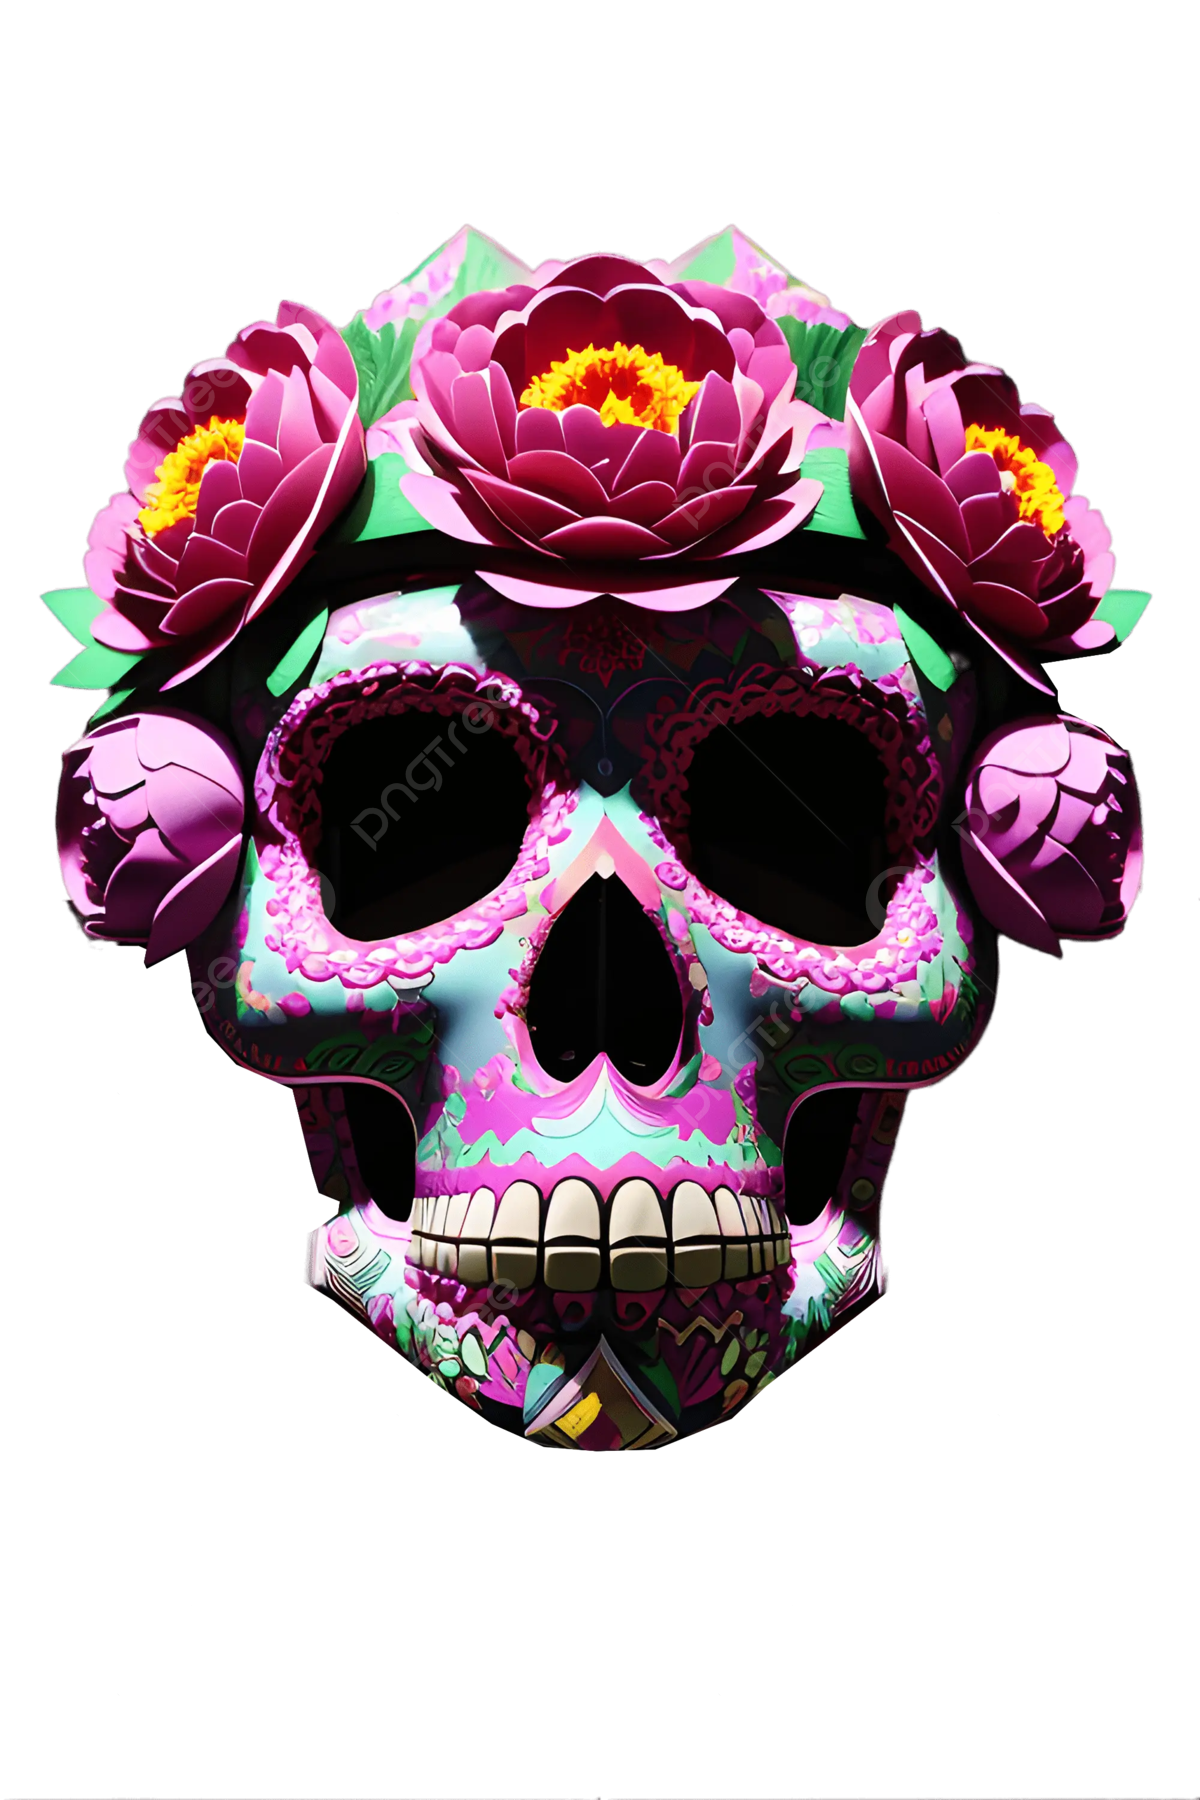 Day of the dead paper mache d mask day of the dead paper mache skull day of the dead skull png transparent clipart image and psd file for free download